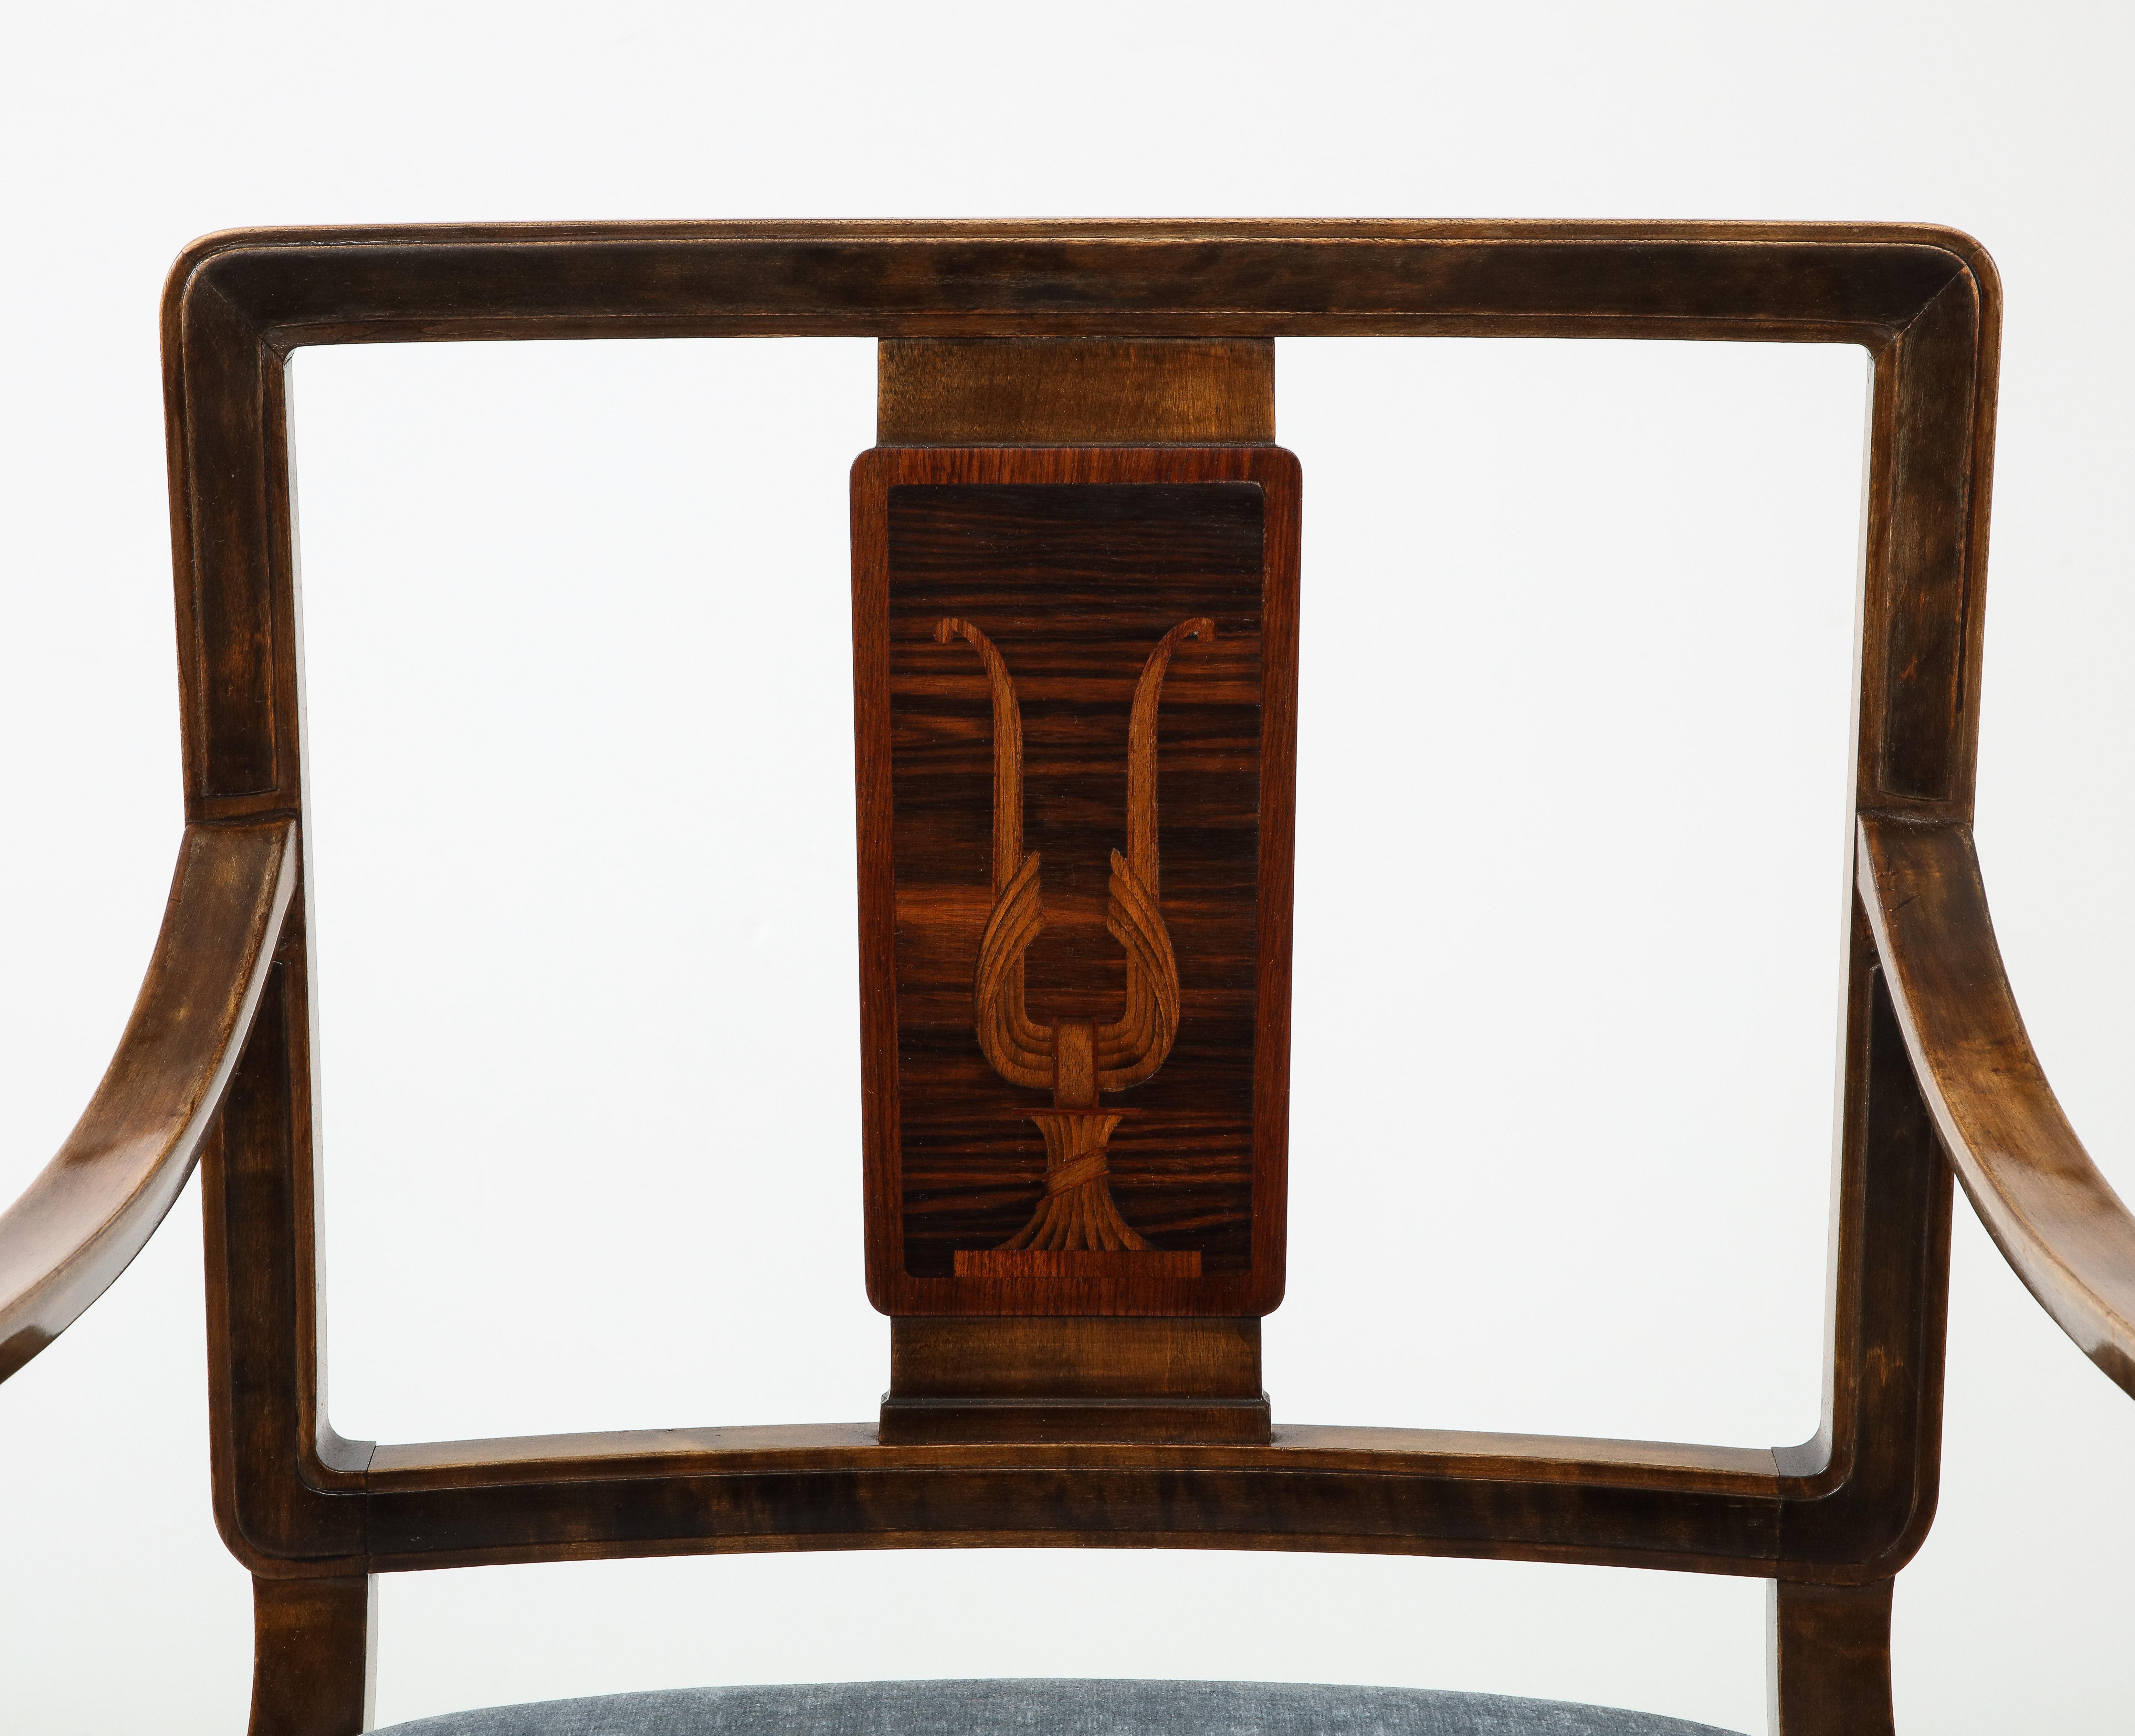 Scandinavian Modern A Swedish Grace Stained Birch and Inlaid Open Armchair, circa 1940